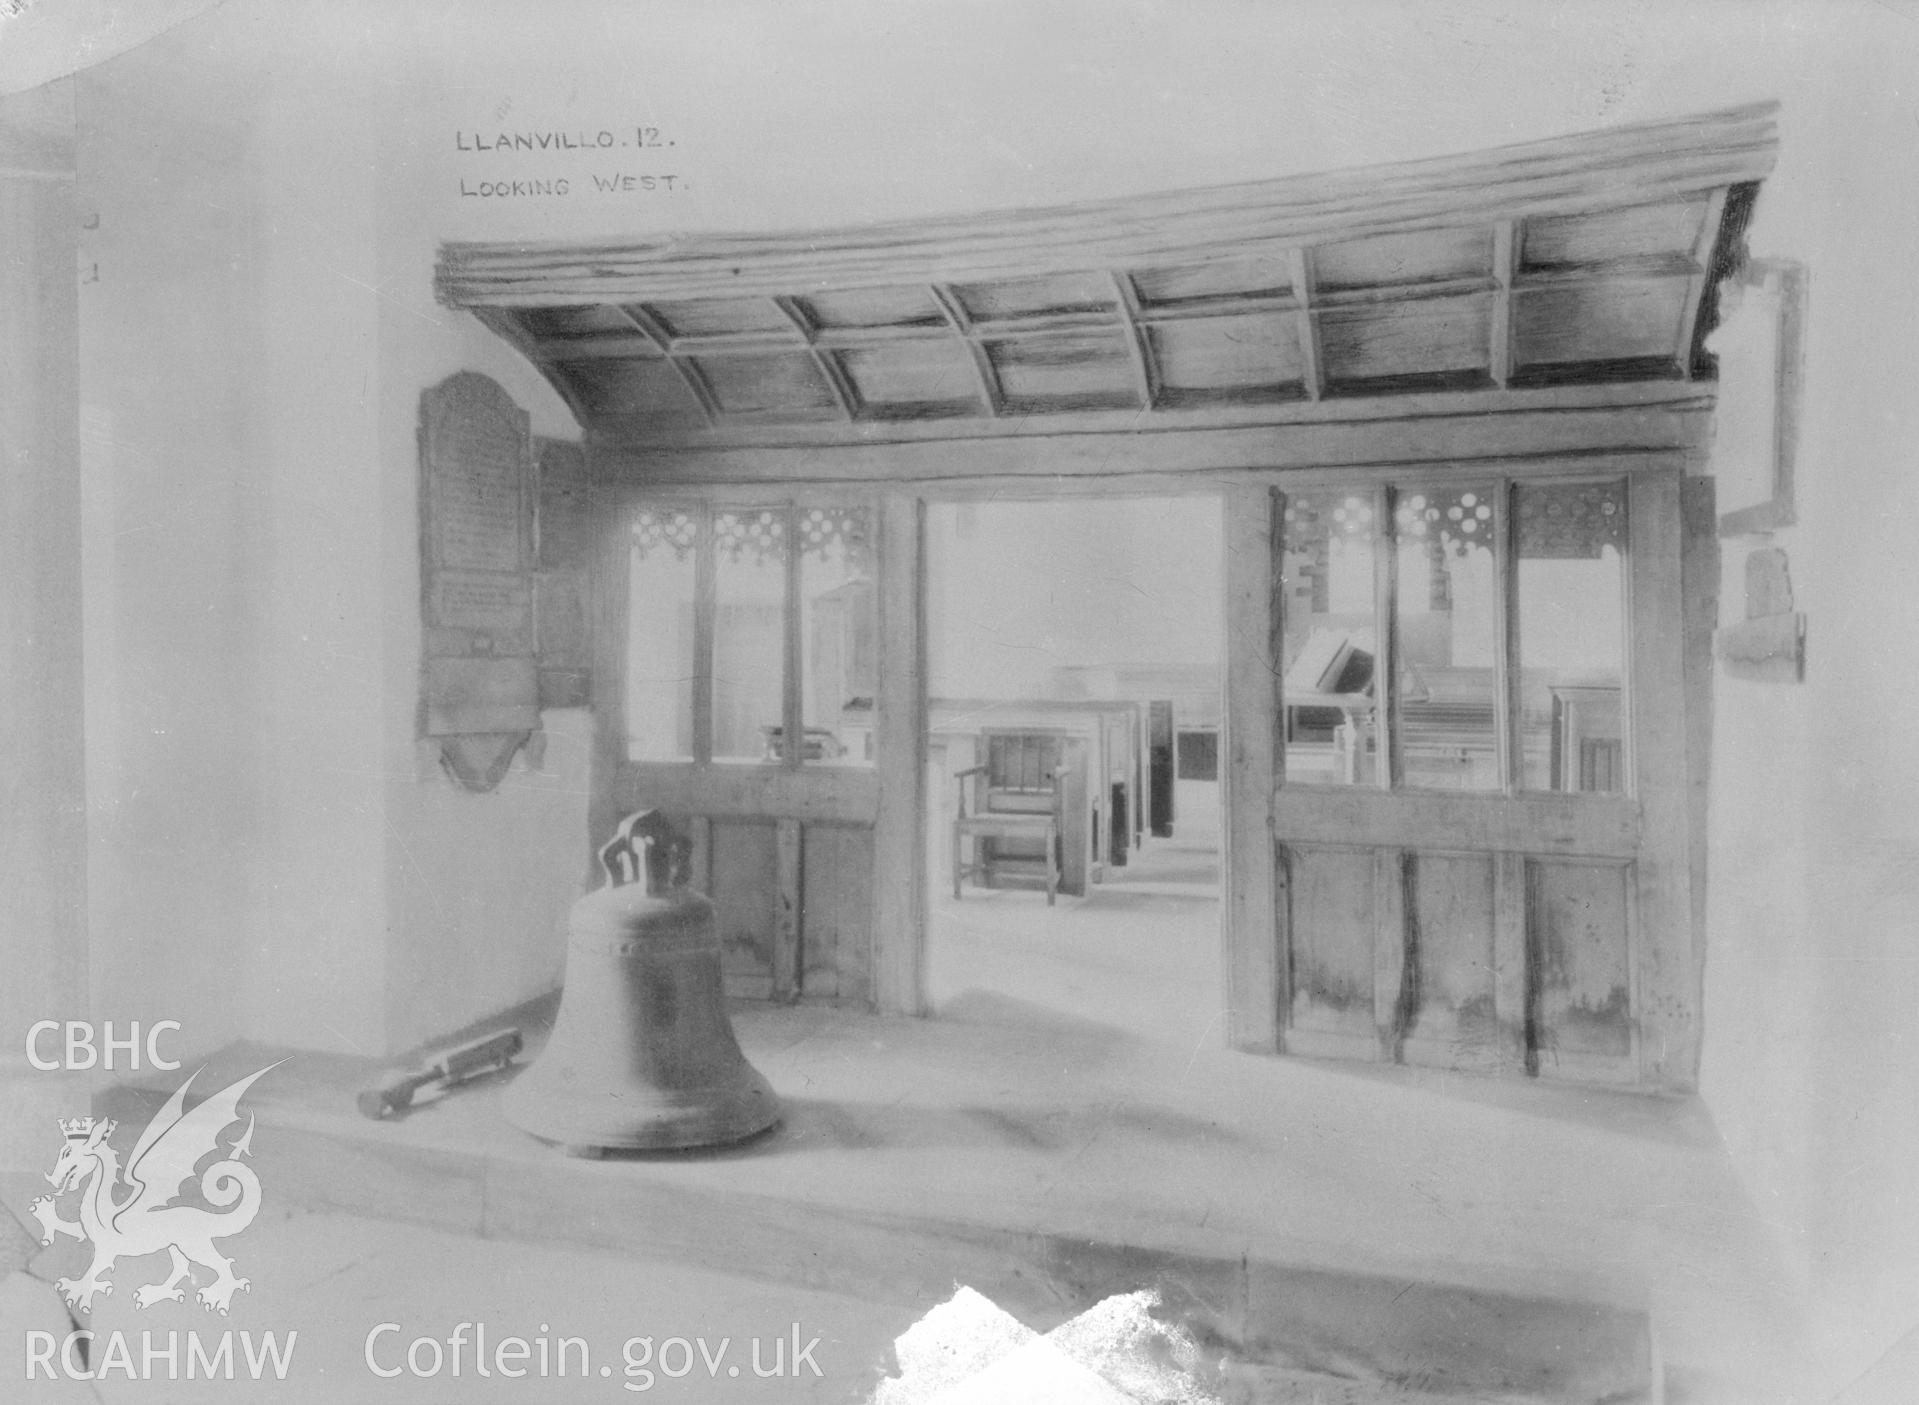 Copy of interior view of St Llanvillo Church showing screen before restoration, taken by W A Call circa 1920.